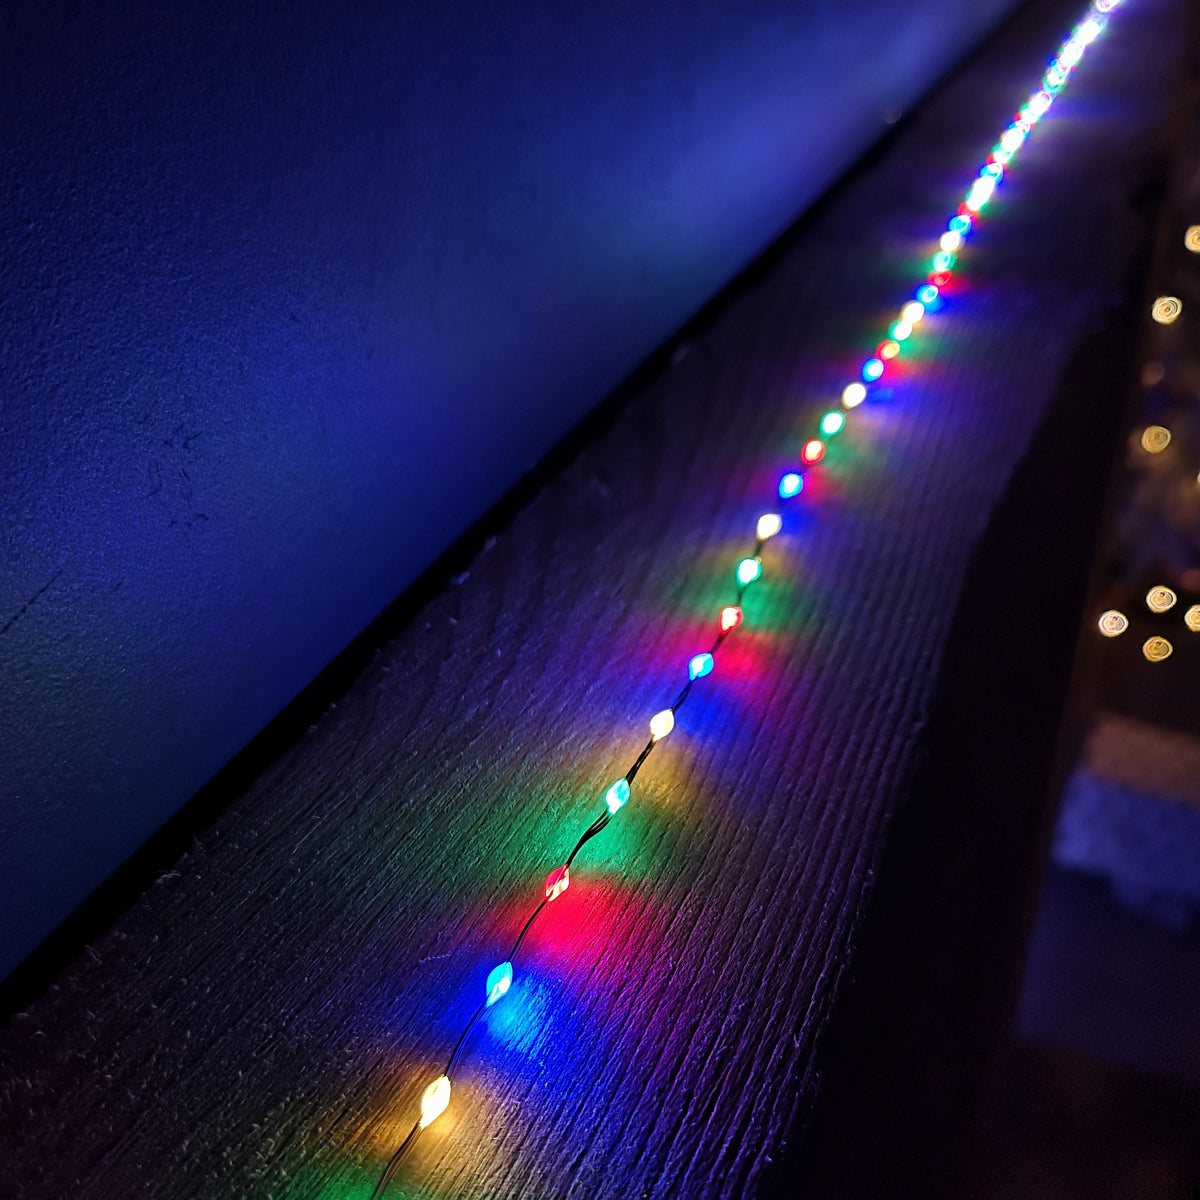 6.4m Compact MicroBrights Christmas Lights with 400 LEDs in Multi-coloured